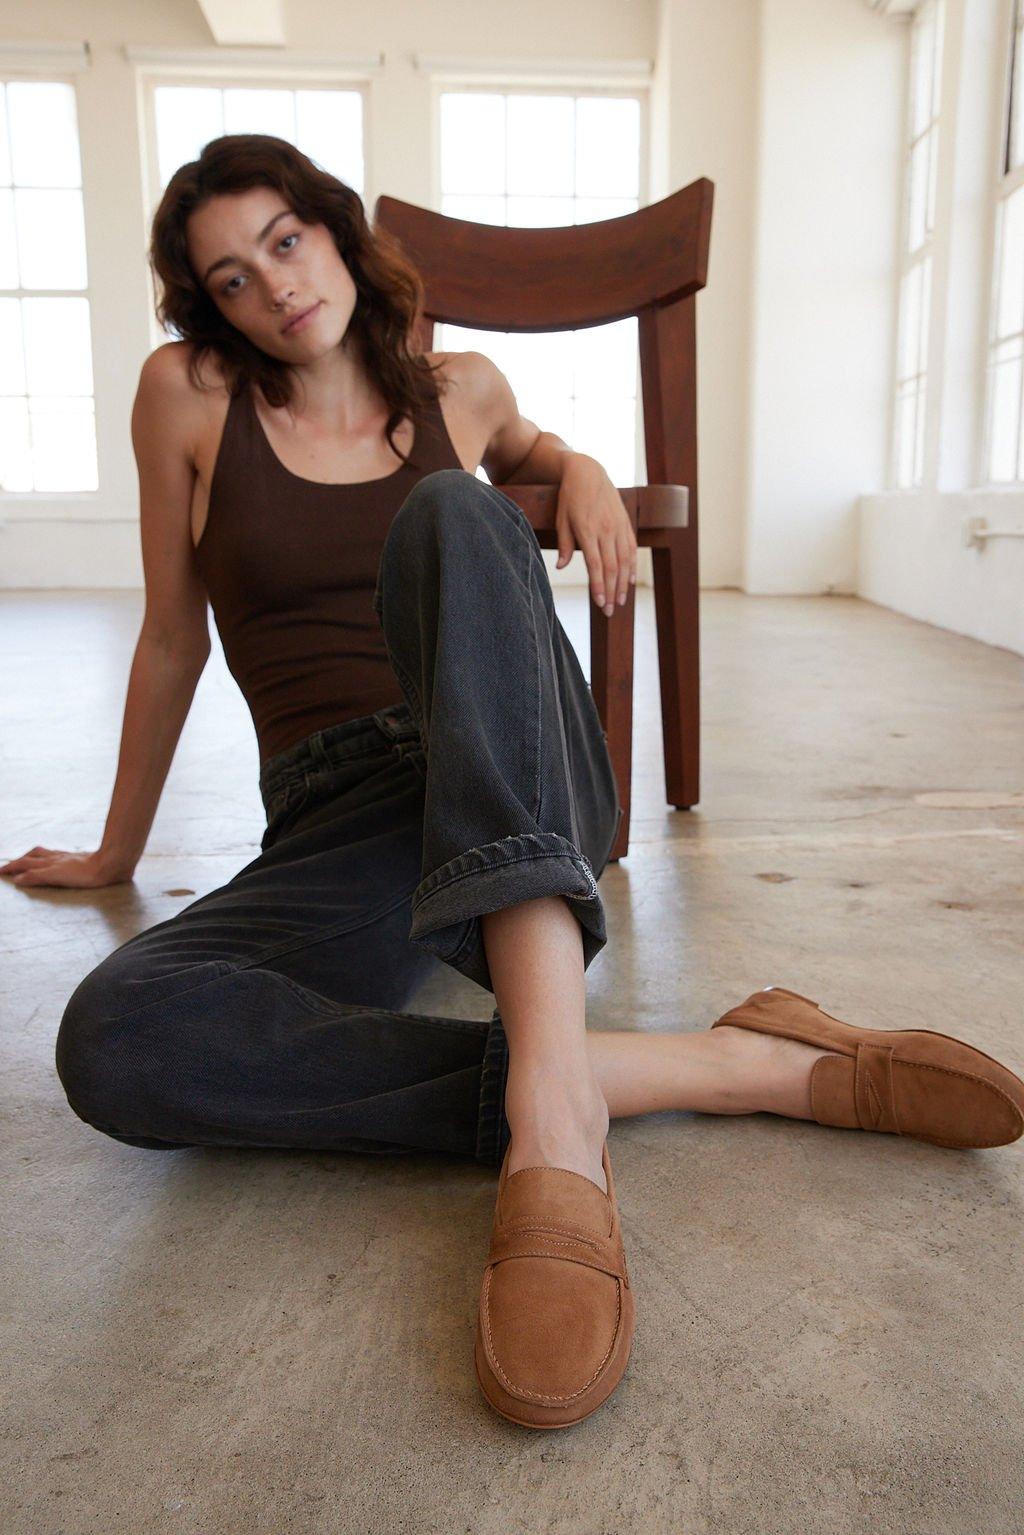 The Penny Loafer in Clove Suede on Body Sitting on Floor 